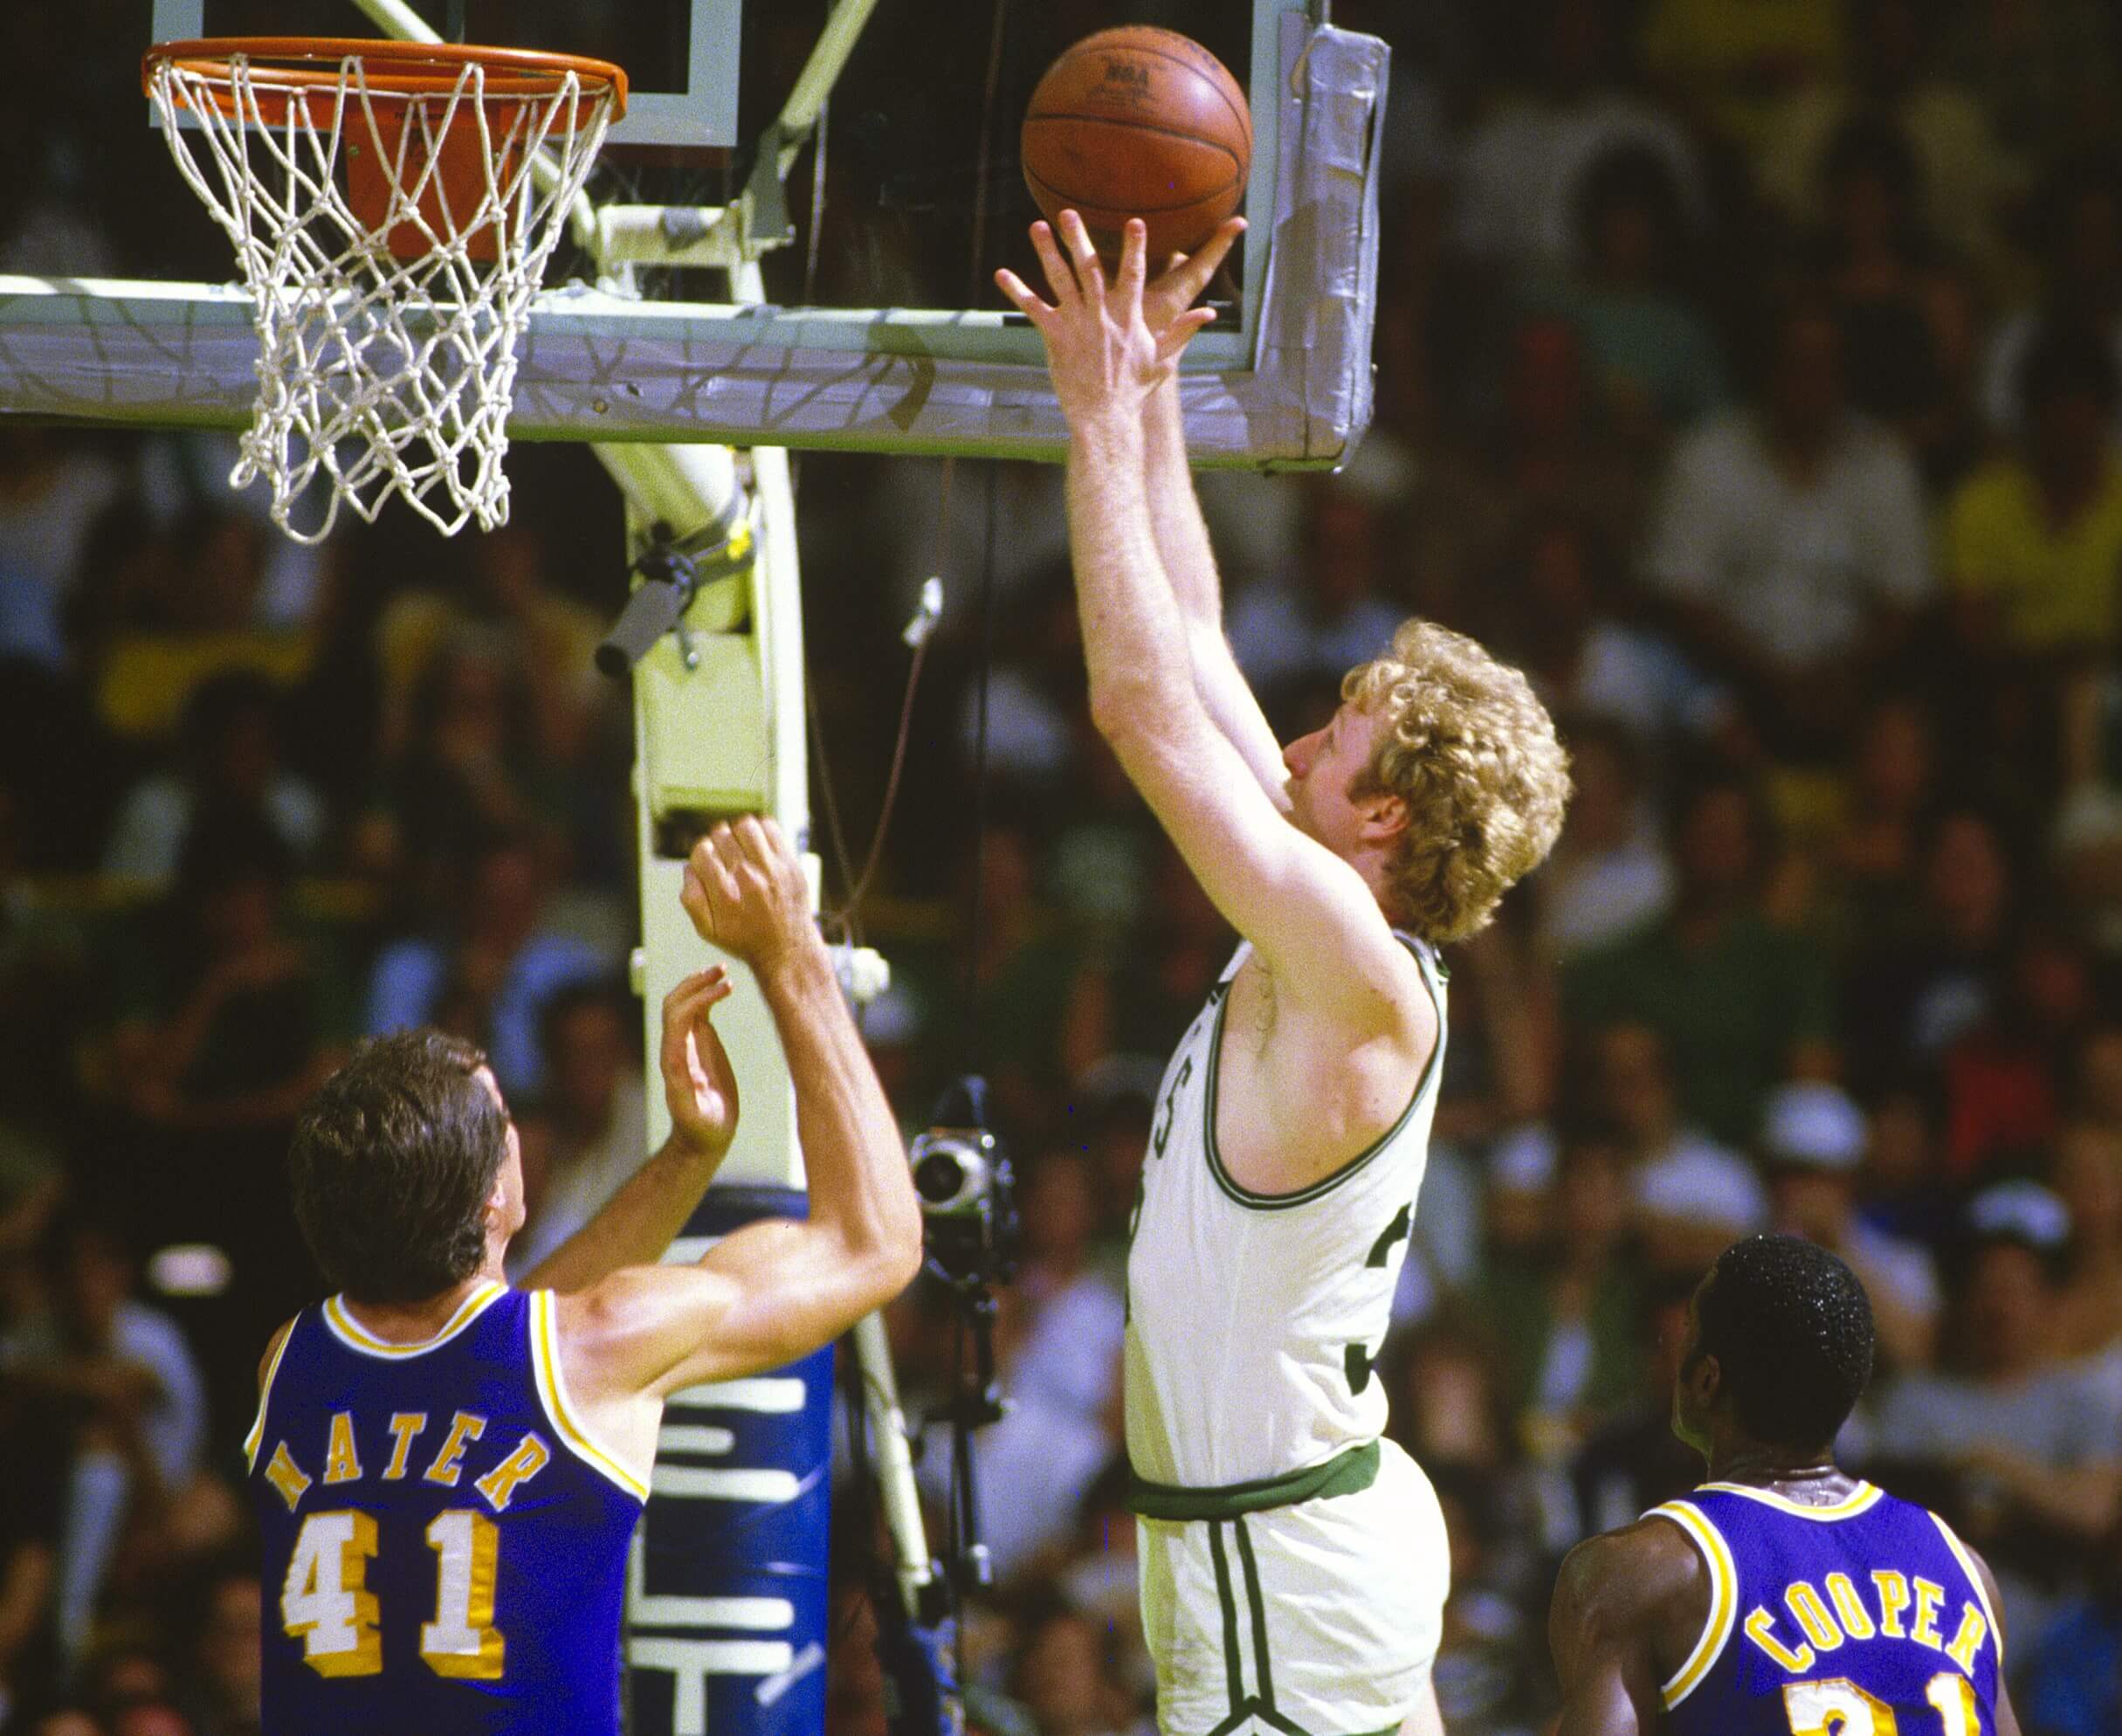 Larry Bird of the Boston Celtics shoots over Swen Nater of the Los Angeles Lakers.